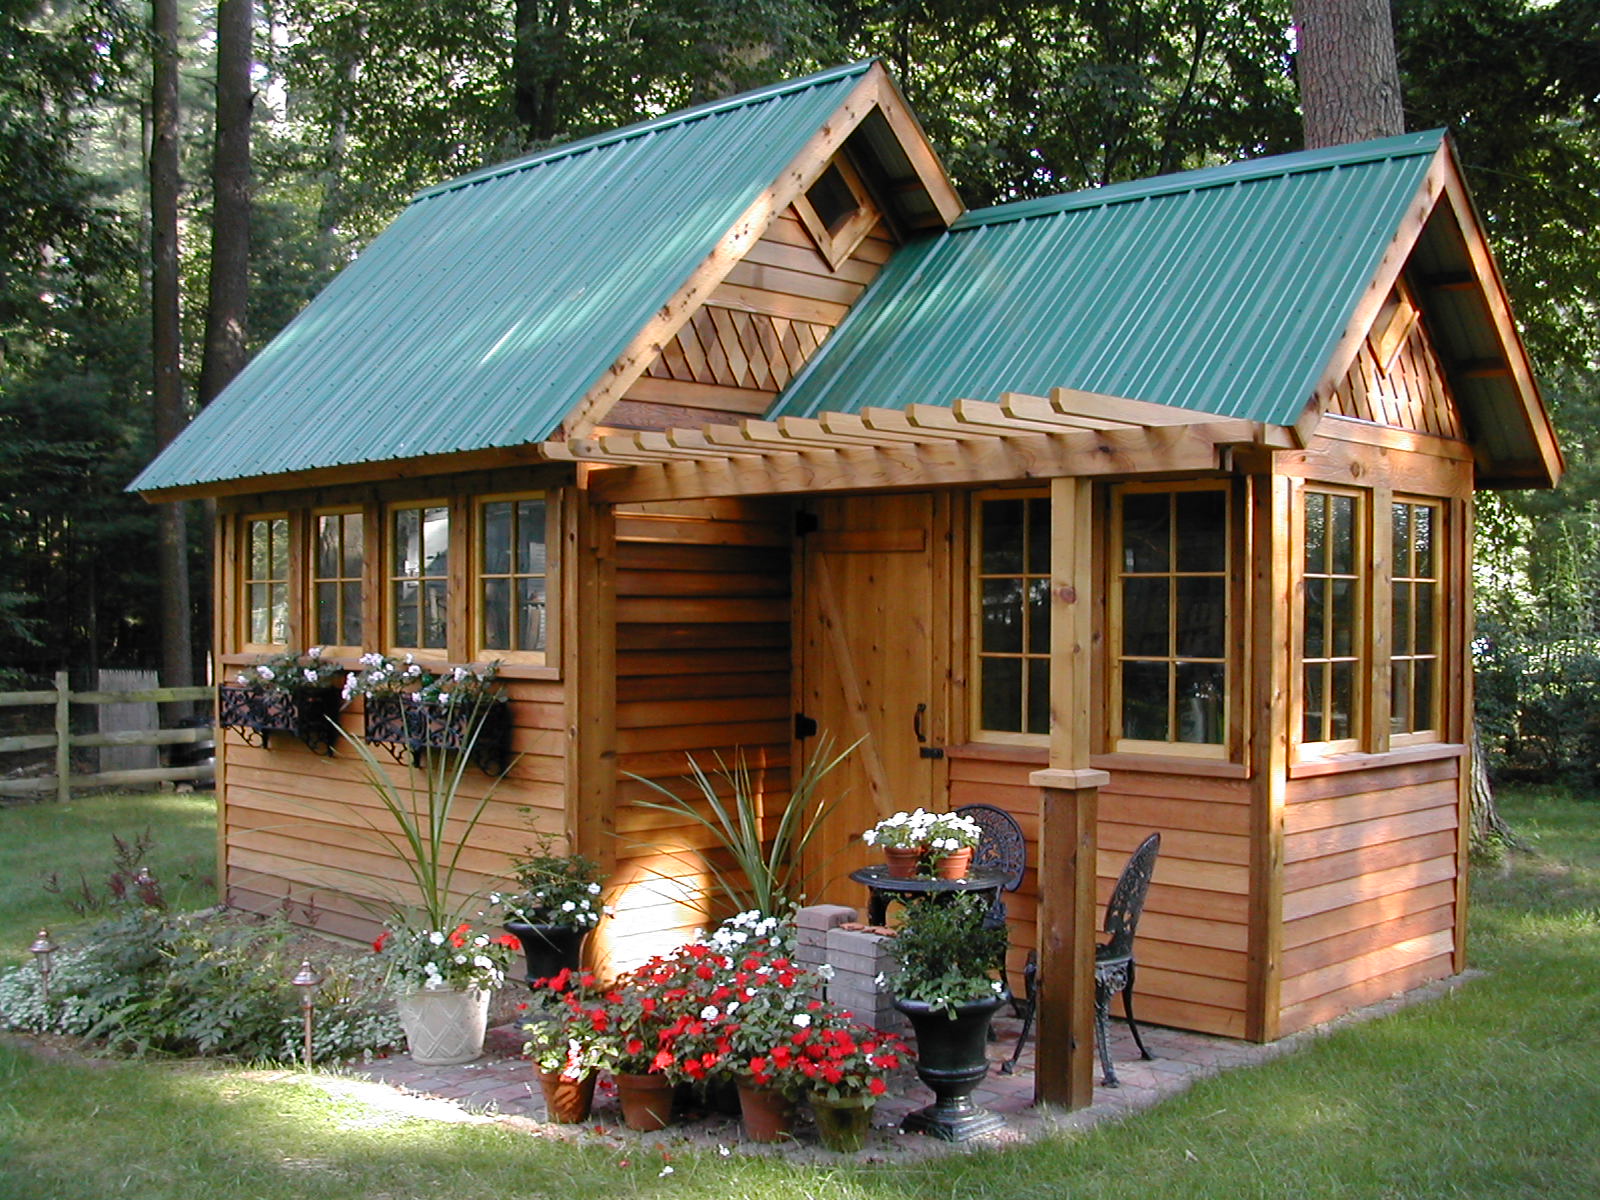 Small Garden Shed Ideas